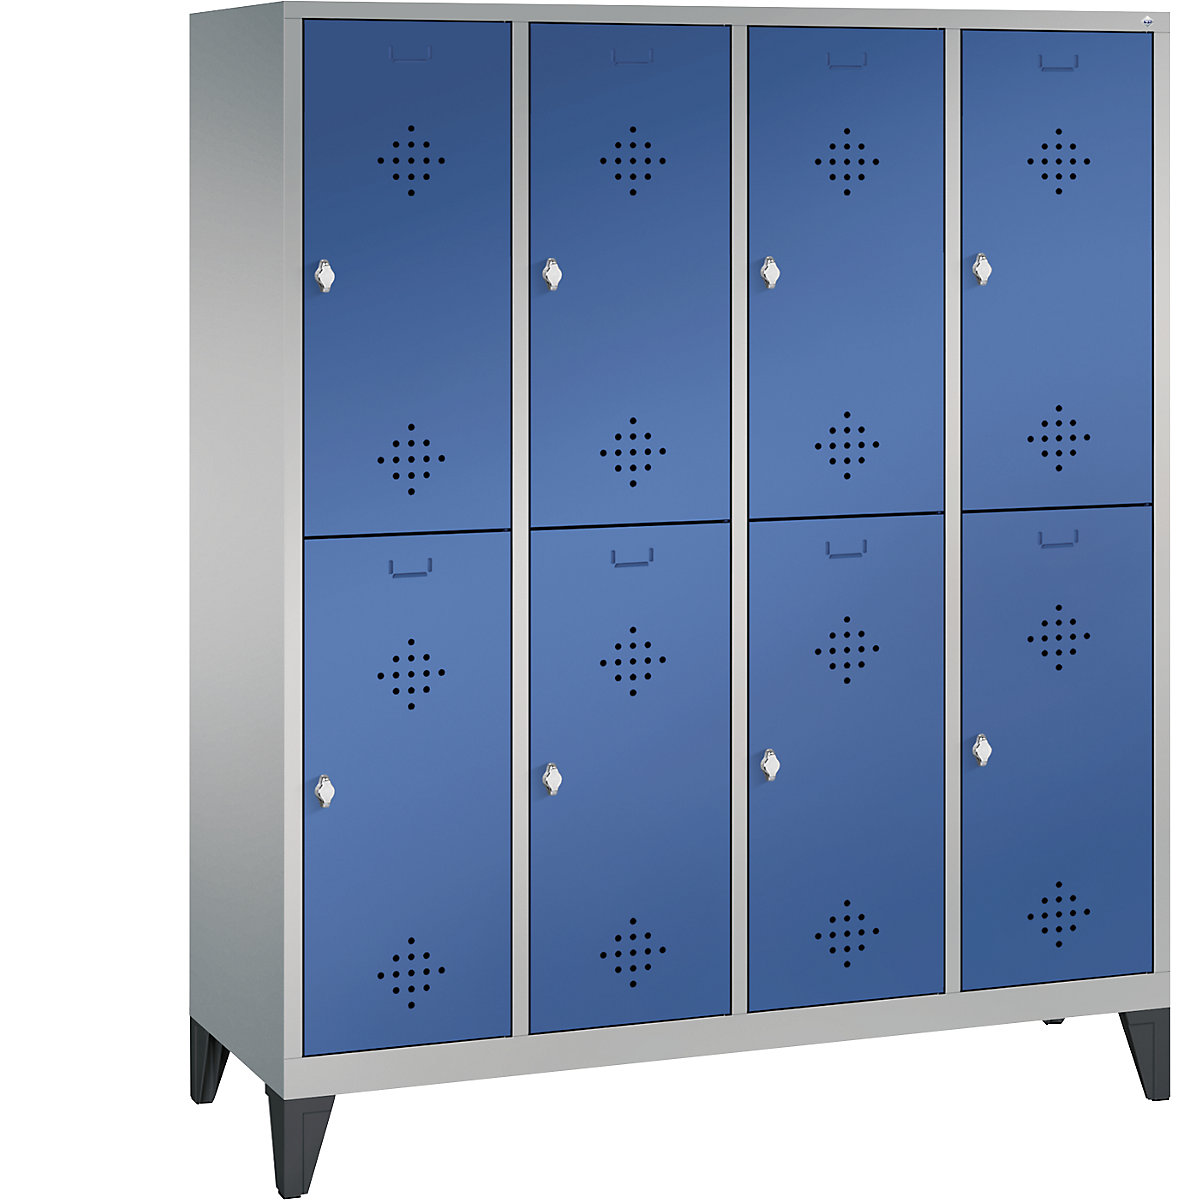 CLASSIC cloakroom locker with feet, double tier – C+P, 4 compartments, 2 shelf compartments each, compartment width 400 mm, white aluminium / gentian blue-14